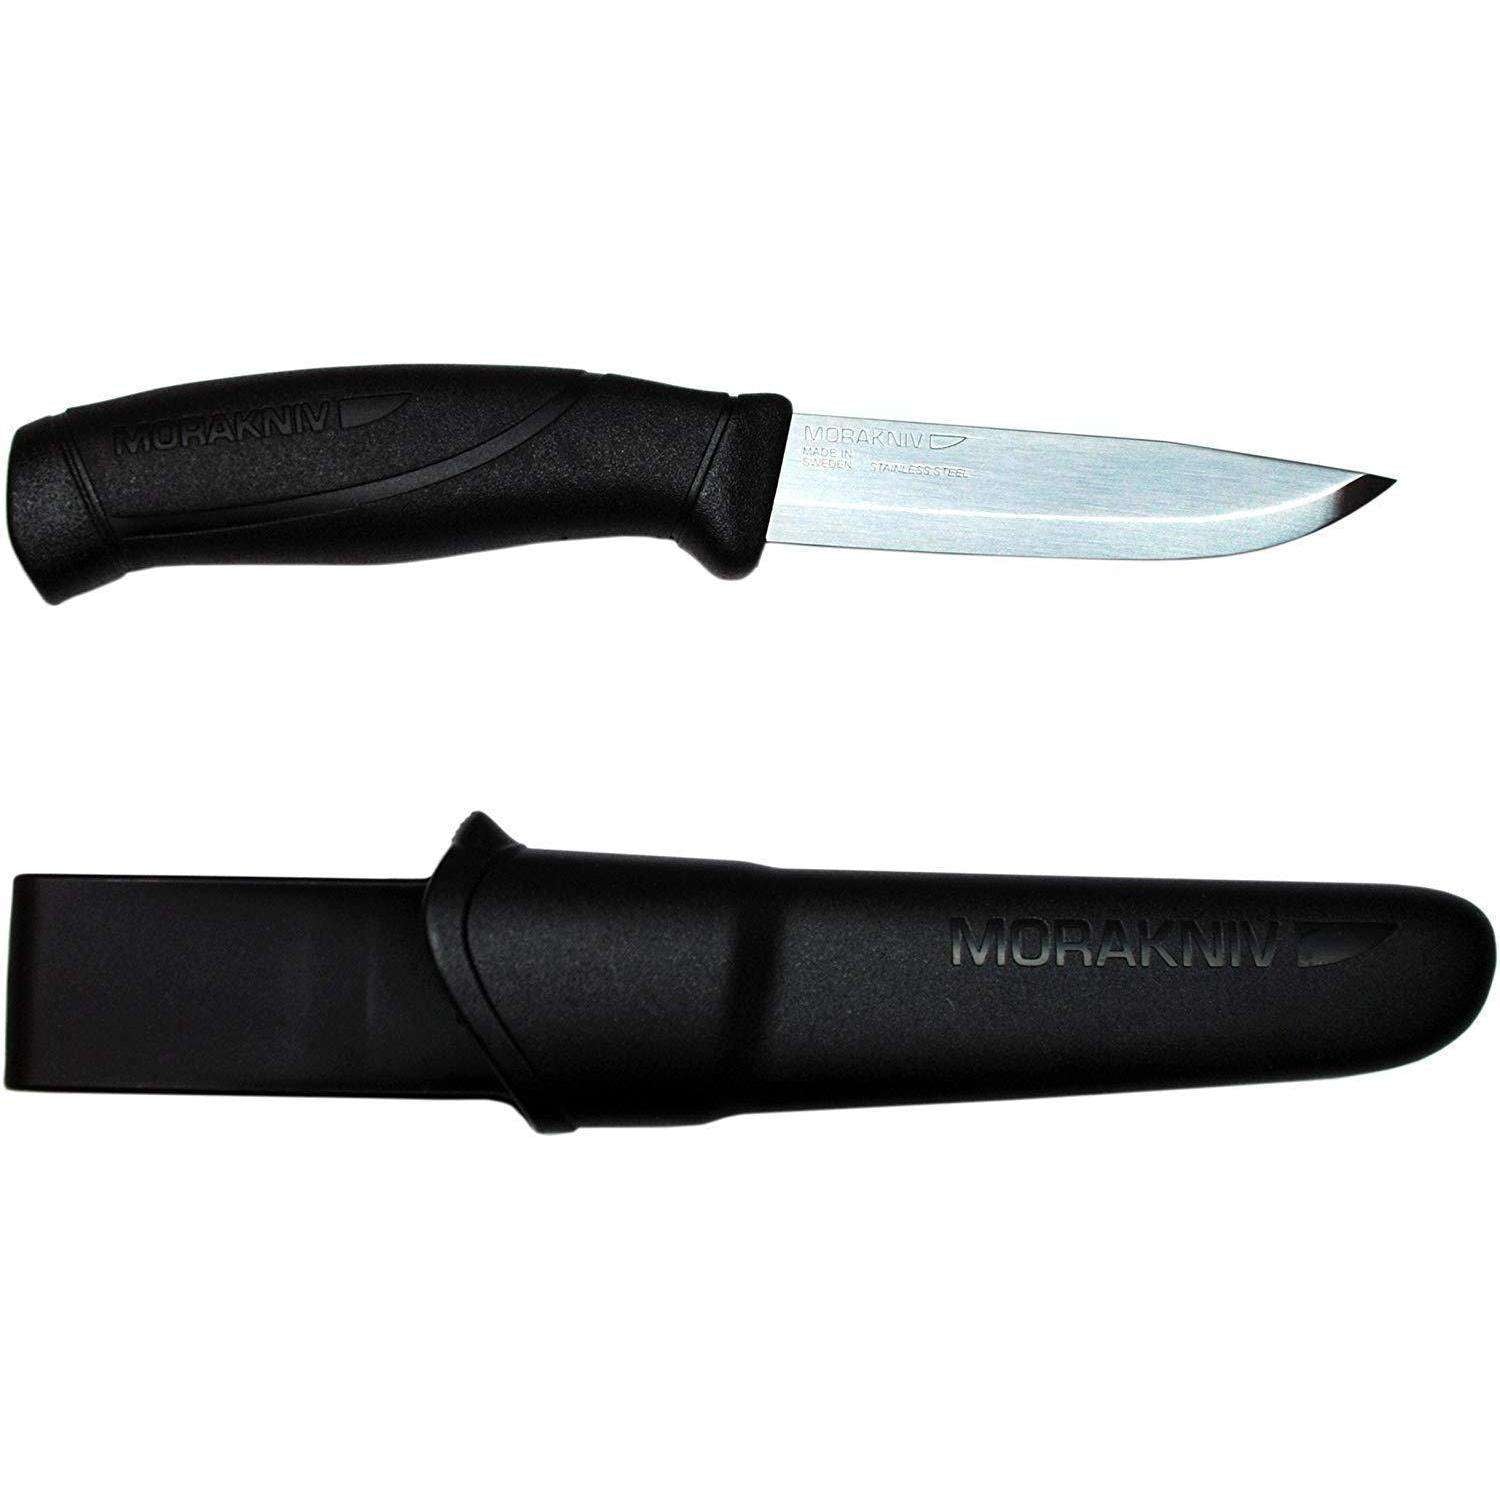 Mora Knives, Morakniv 860 Companion - Stainless Steel, Fixed Blade Bushcraft Knives,Wylies Outdoor World,